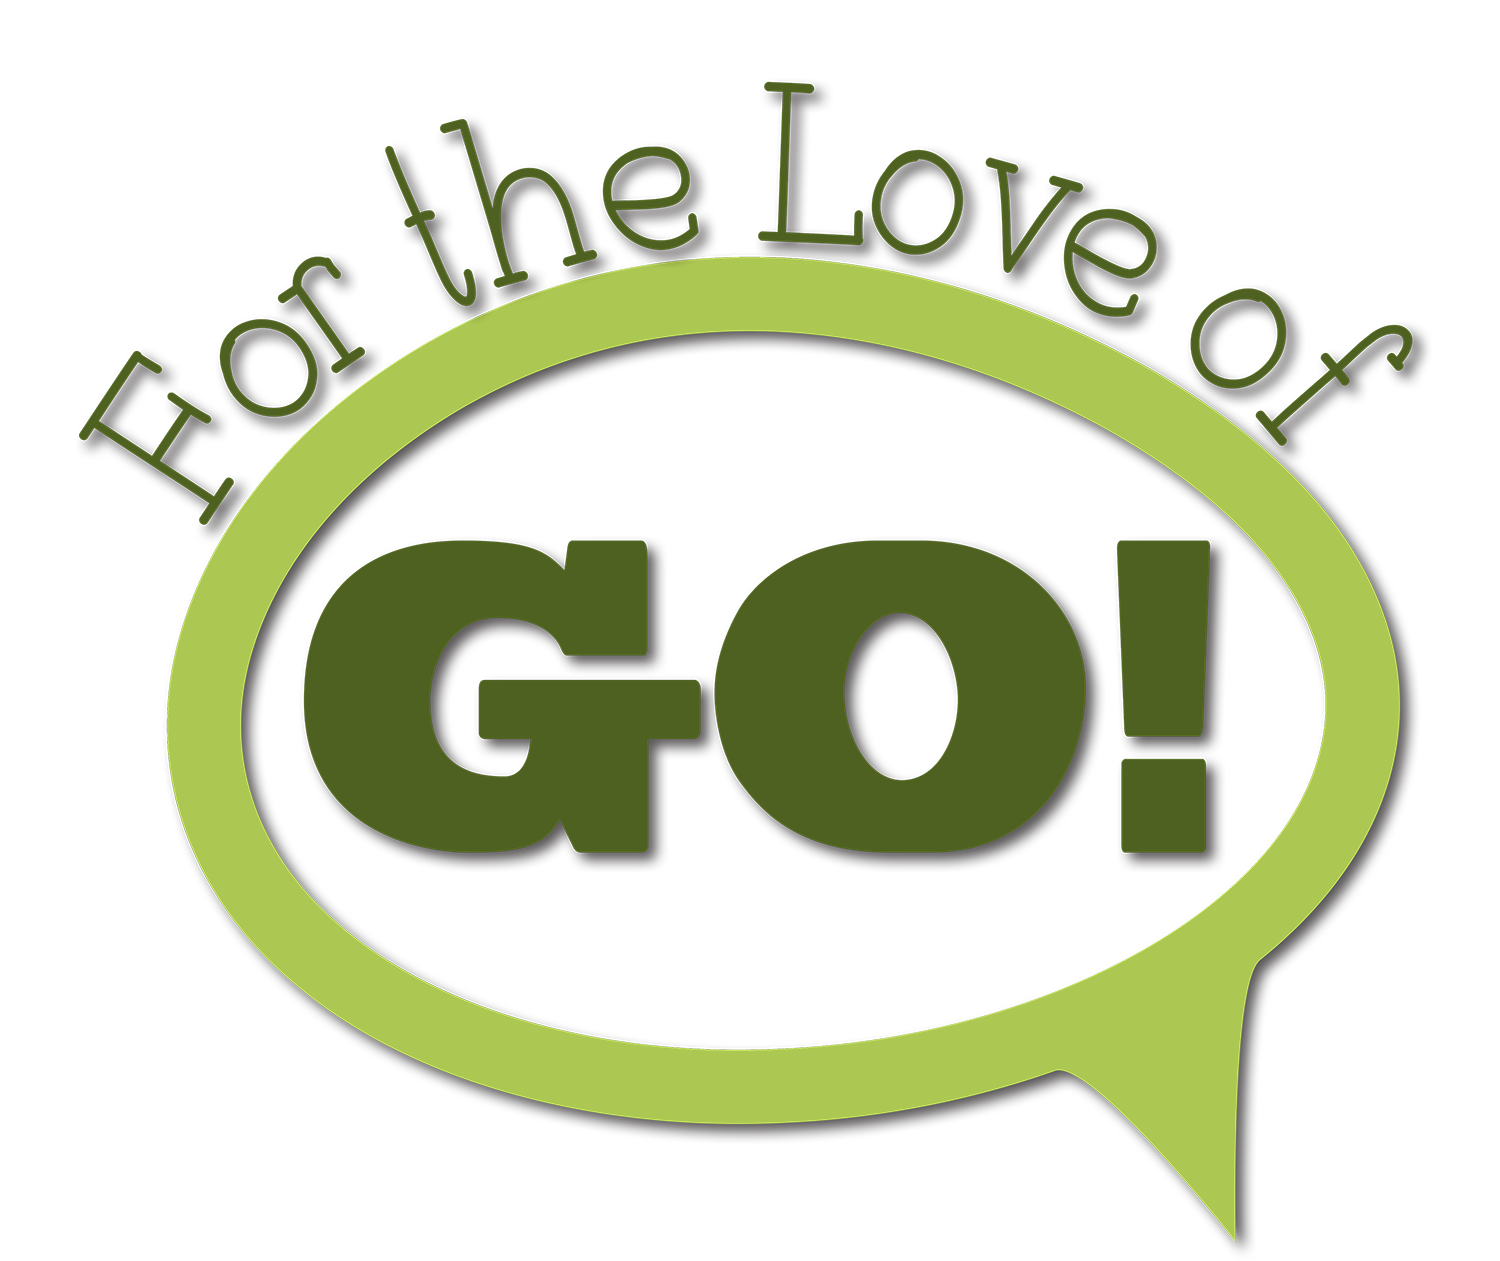 For The Love of Go